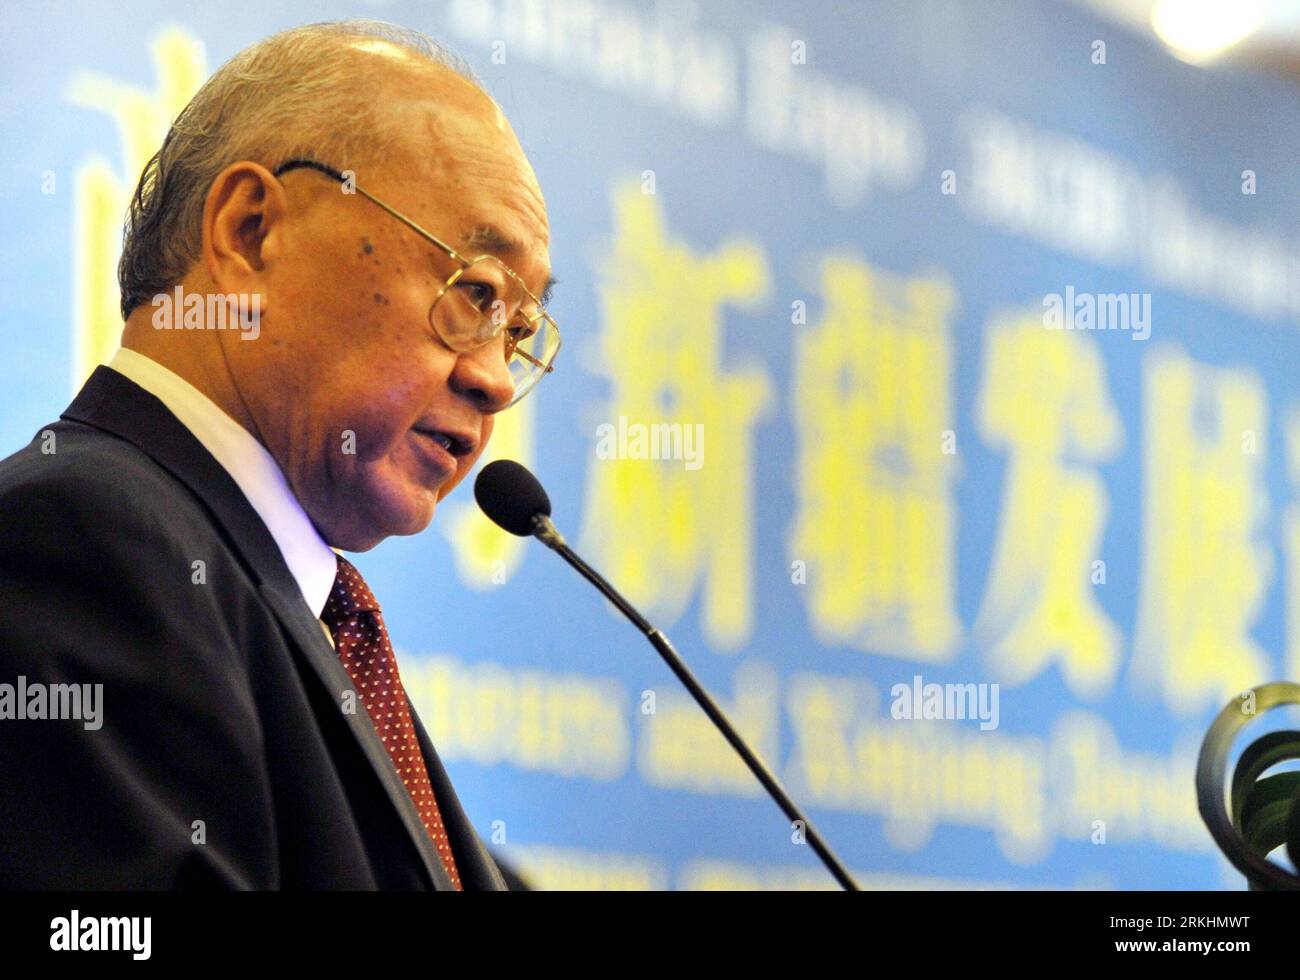 Bildnummer: 55869103  Datum: 31.08.2011  Copyright: imago/Xinhua (110831) -- URUMQI, Aug. 31, 2011 (Xinhua) -- Lim Gait Tong, honorary president of the Malaysia-China Chamber of Commerce, addresses the Overseas Chinese Entrepreneurs and Xinjiang Development Forum held in Urumqi, capital of northwest China s Xinjiang Uygur Autonomous Region, Aug. 31, 2011. The Overseas Chinese Entrepreneurs and Xinjiang Development Forum kicked off in Urumqi on Wednesday. The forum was a part of the first China-Eurasia Expo held in Xinjiang. Some 100 well-known overseas Chinese entrepreneurs and representatives Stock Photo